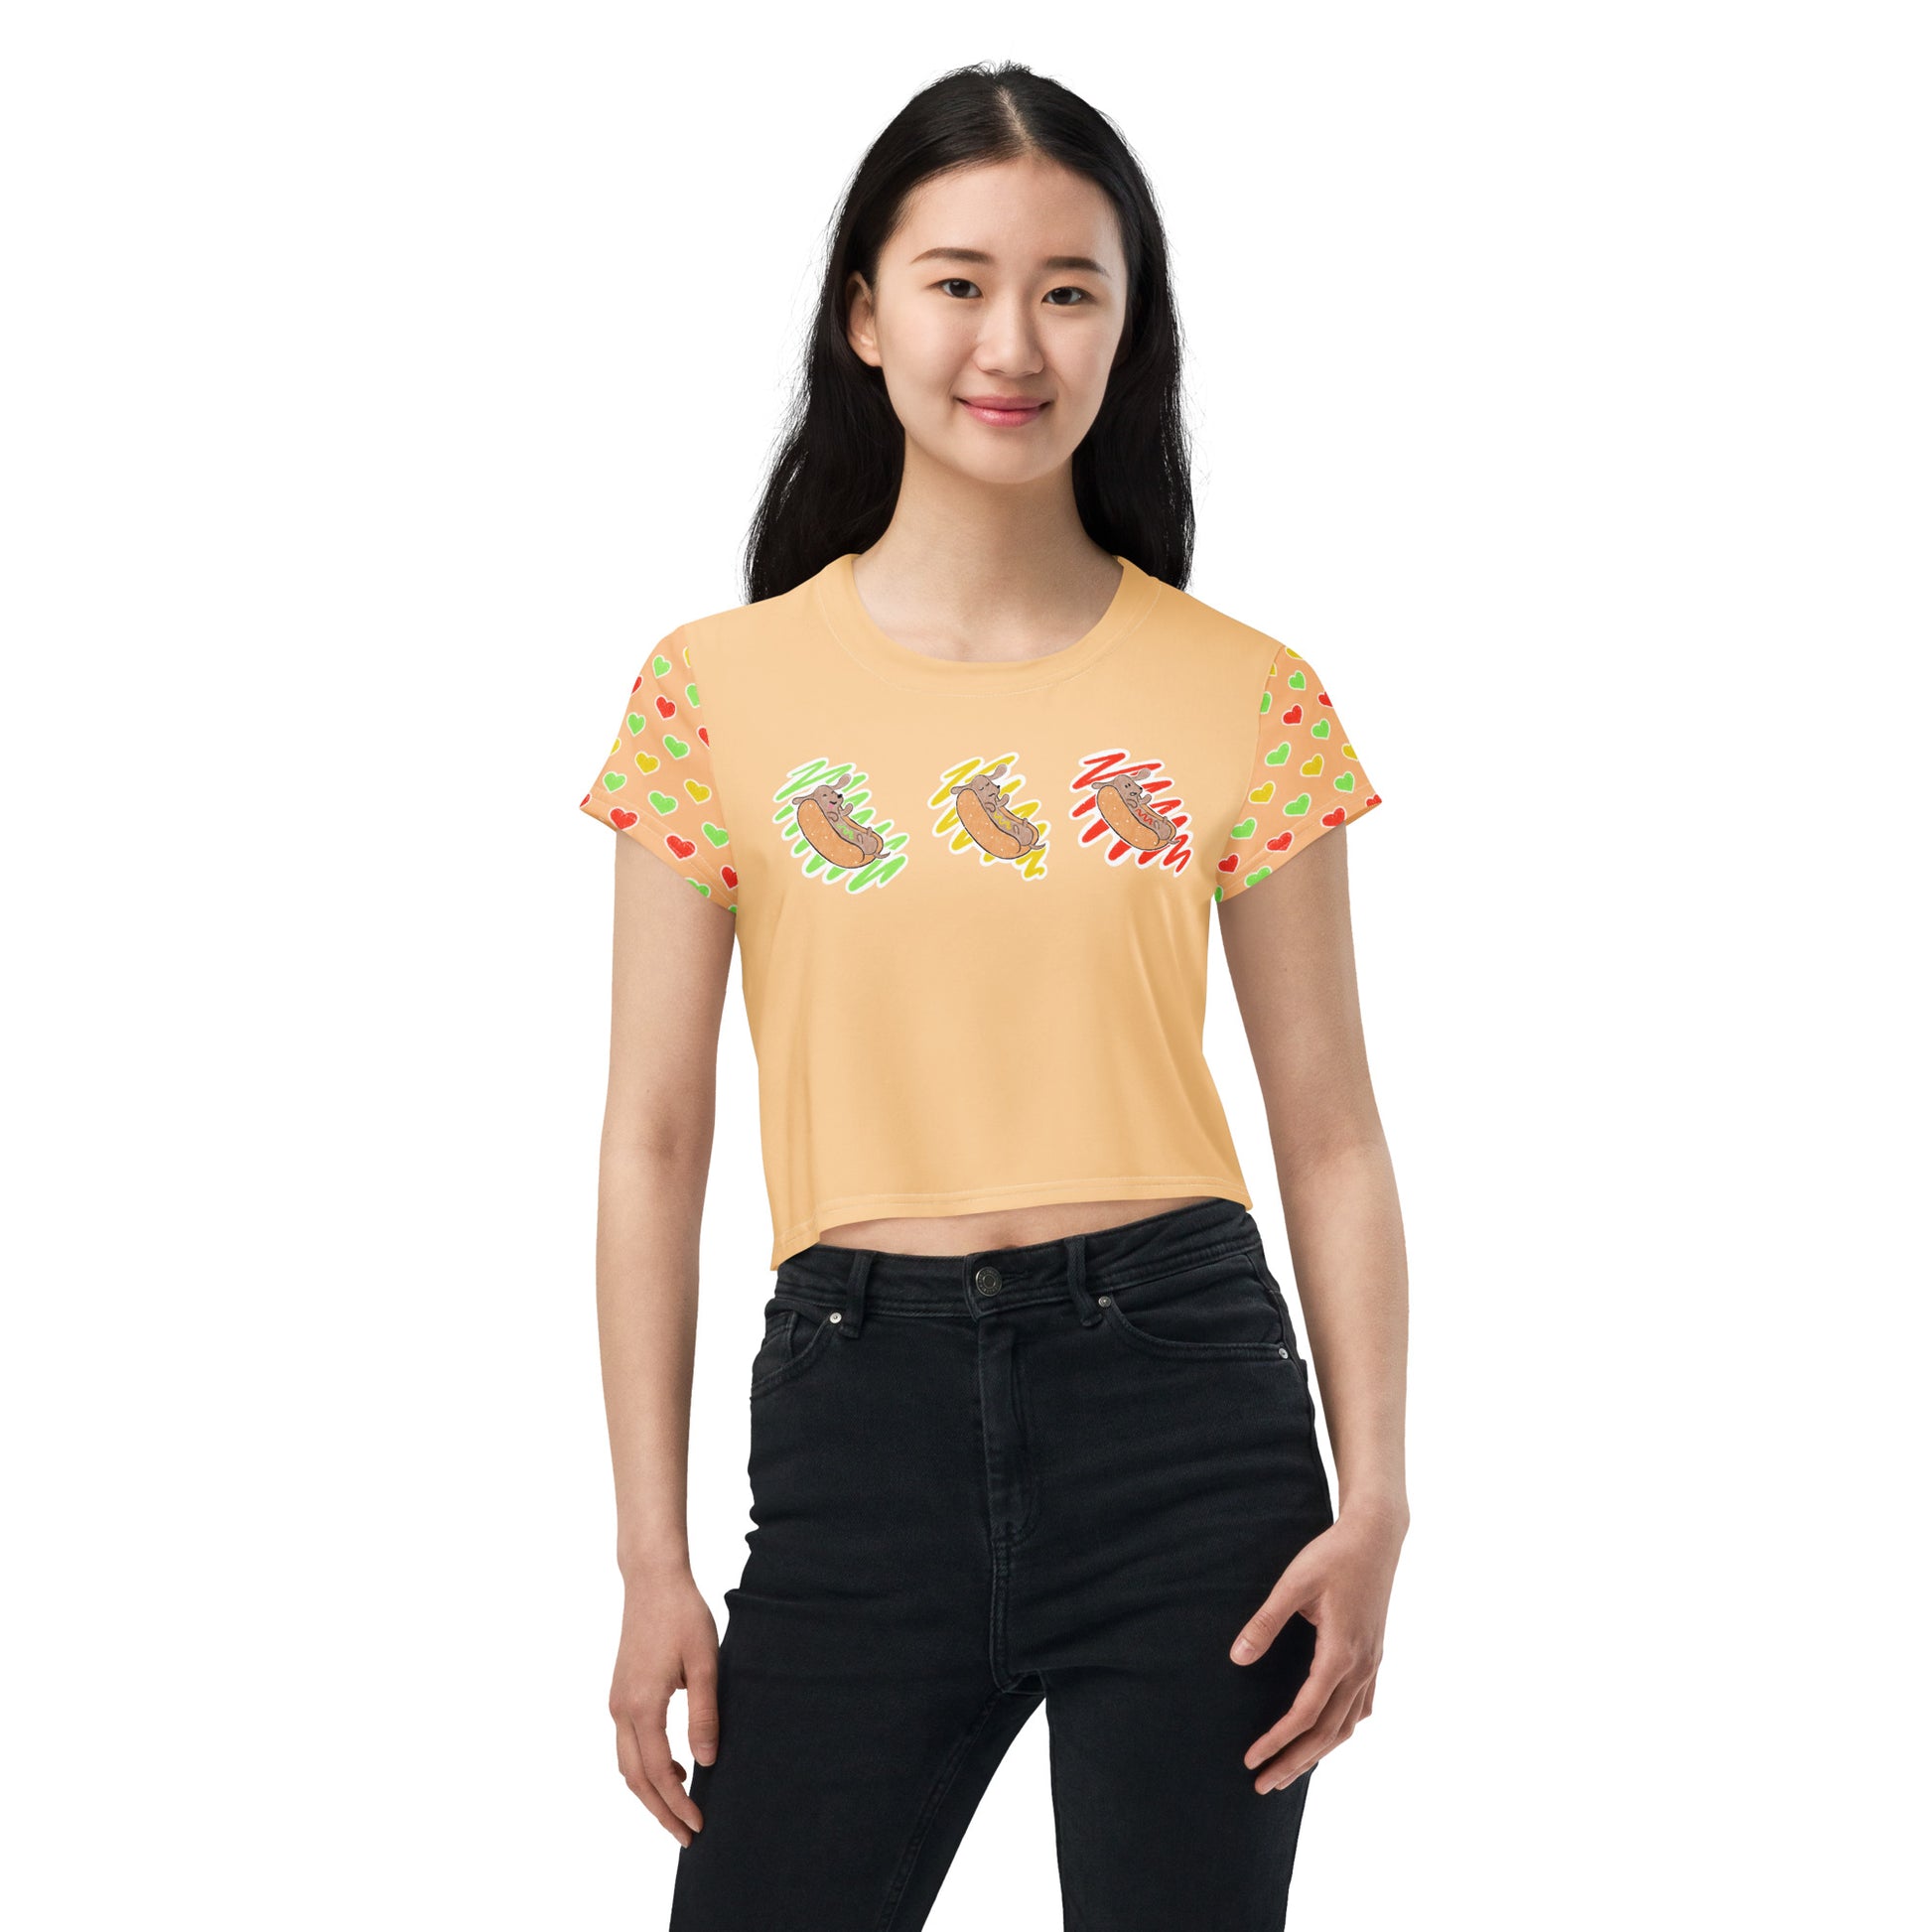 Hot Dog Lover Dog Mom Crop Top - Condiments - Boogs & Boop